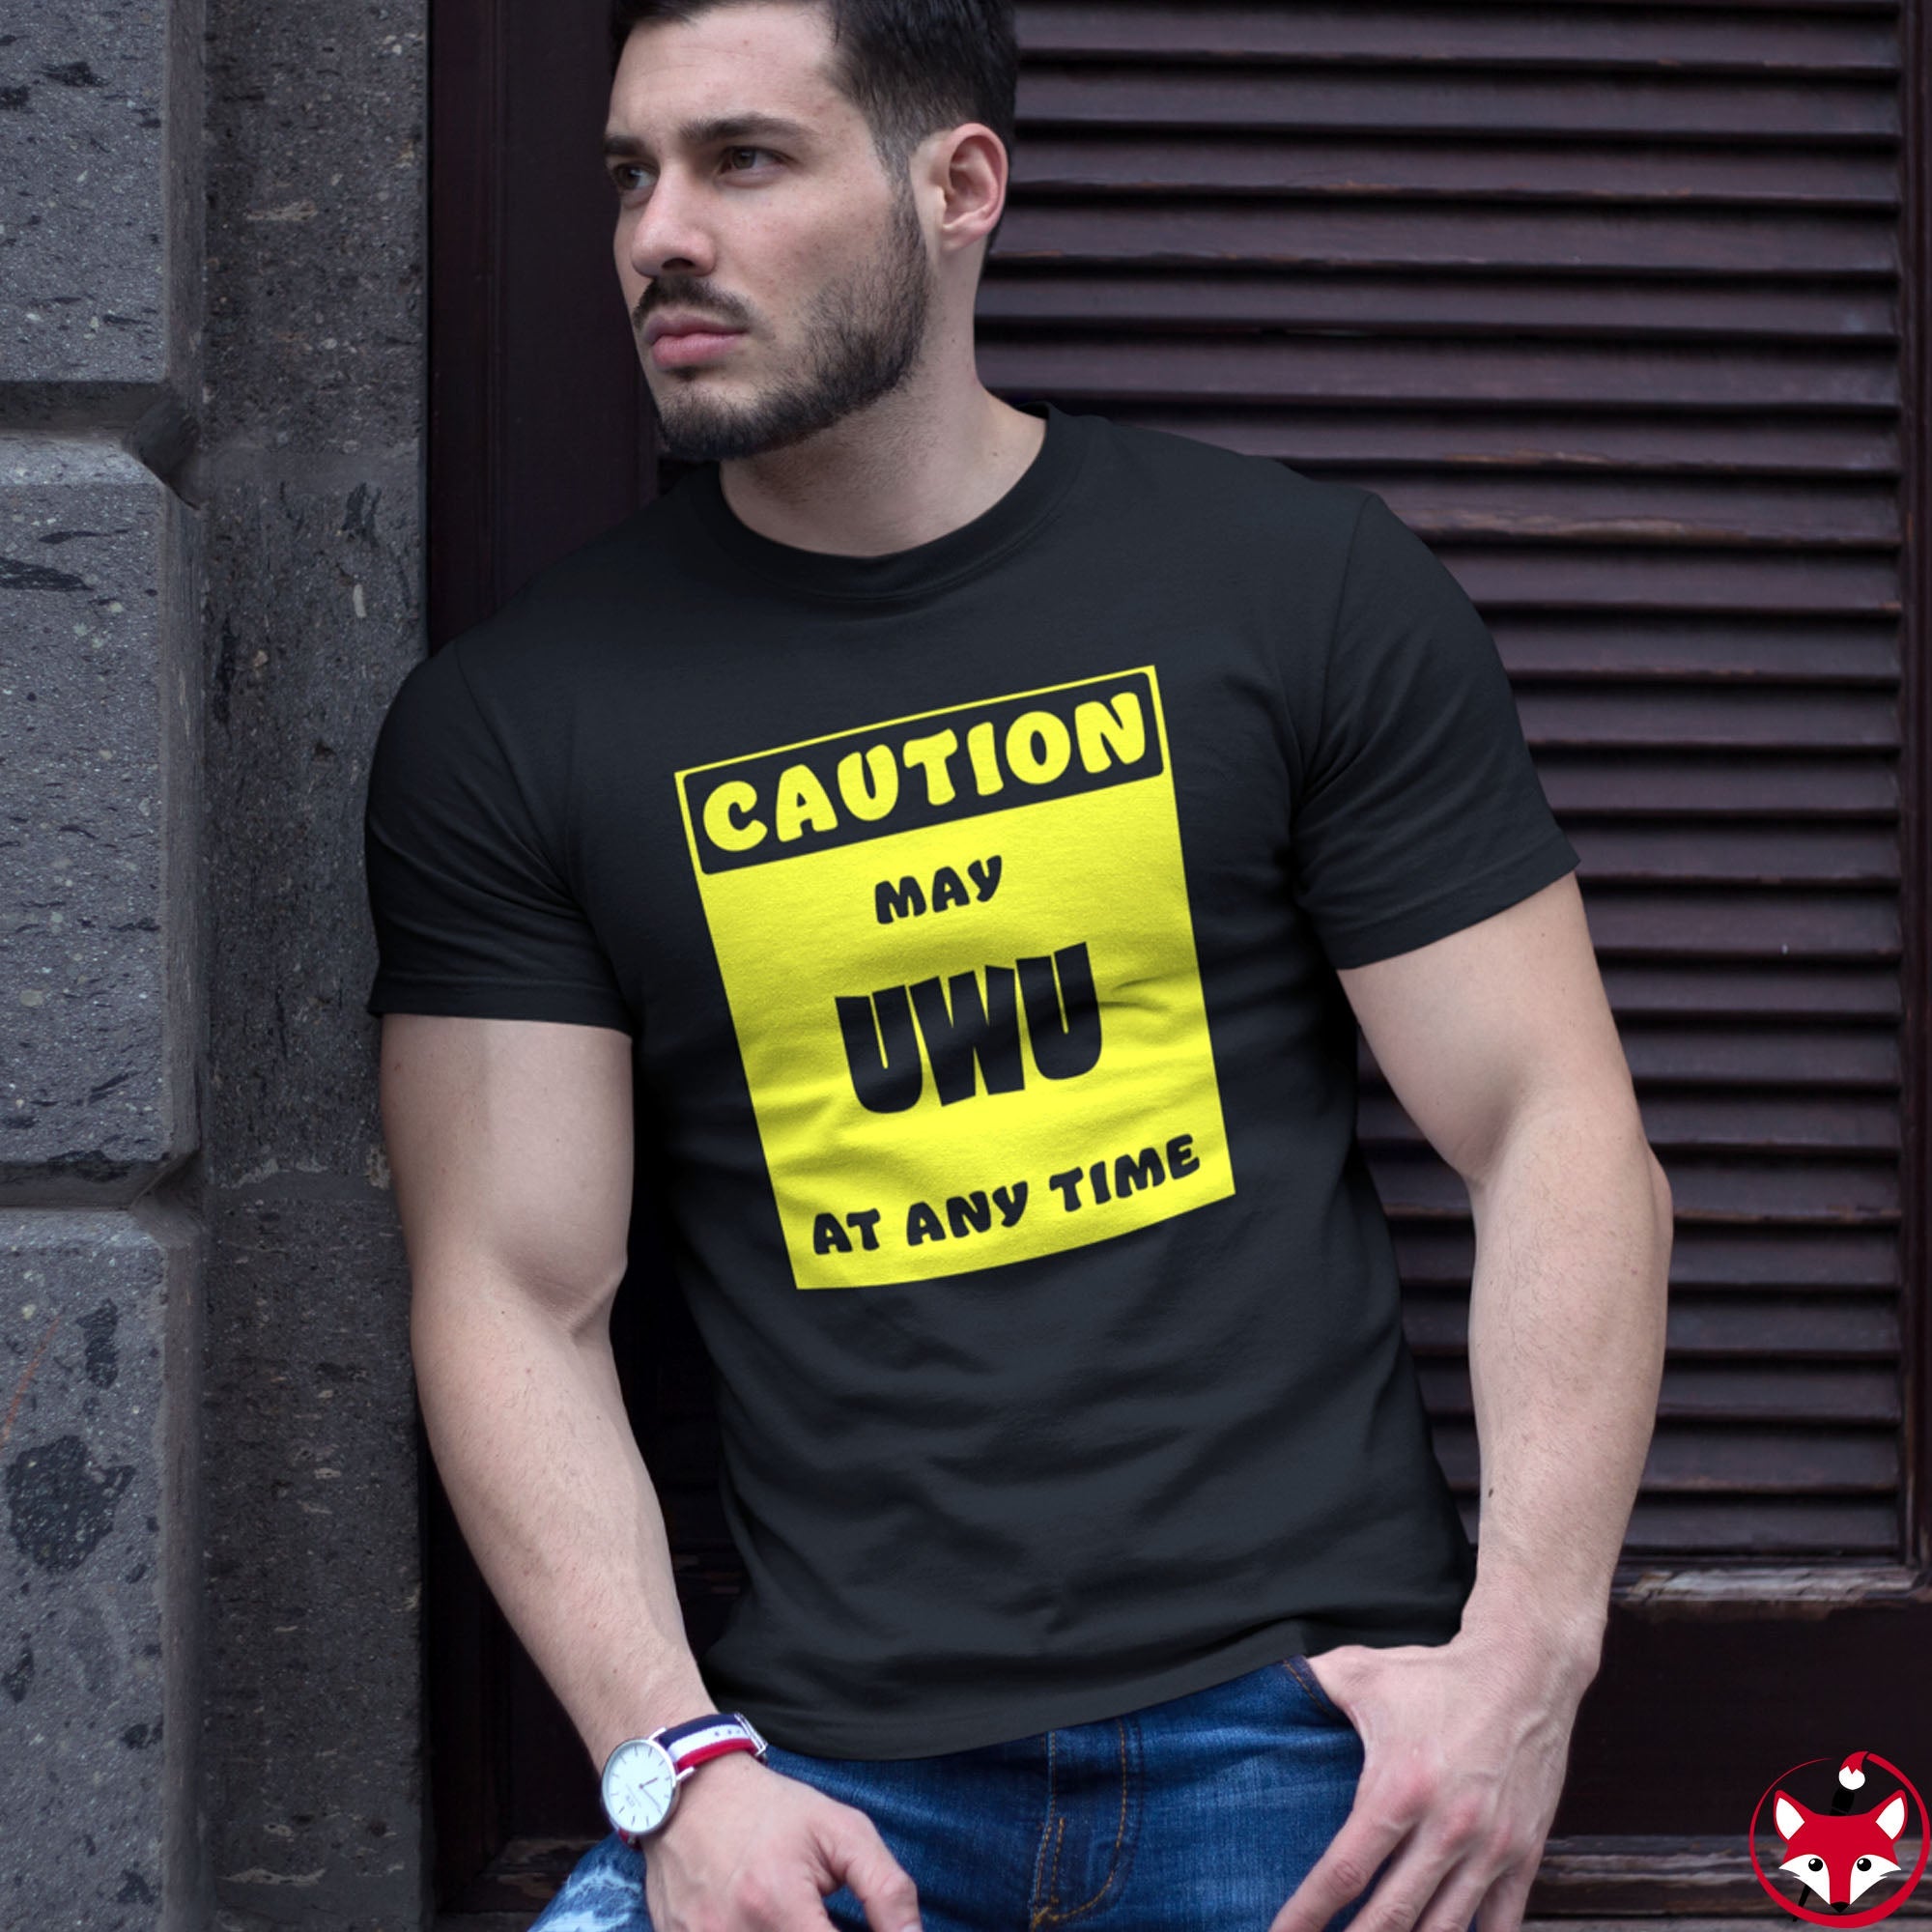 CAUTION! May UWU at any time! - T-Shirt T-Shirt AFLT-Whootorca 